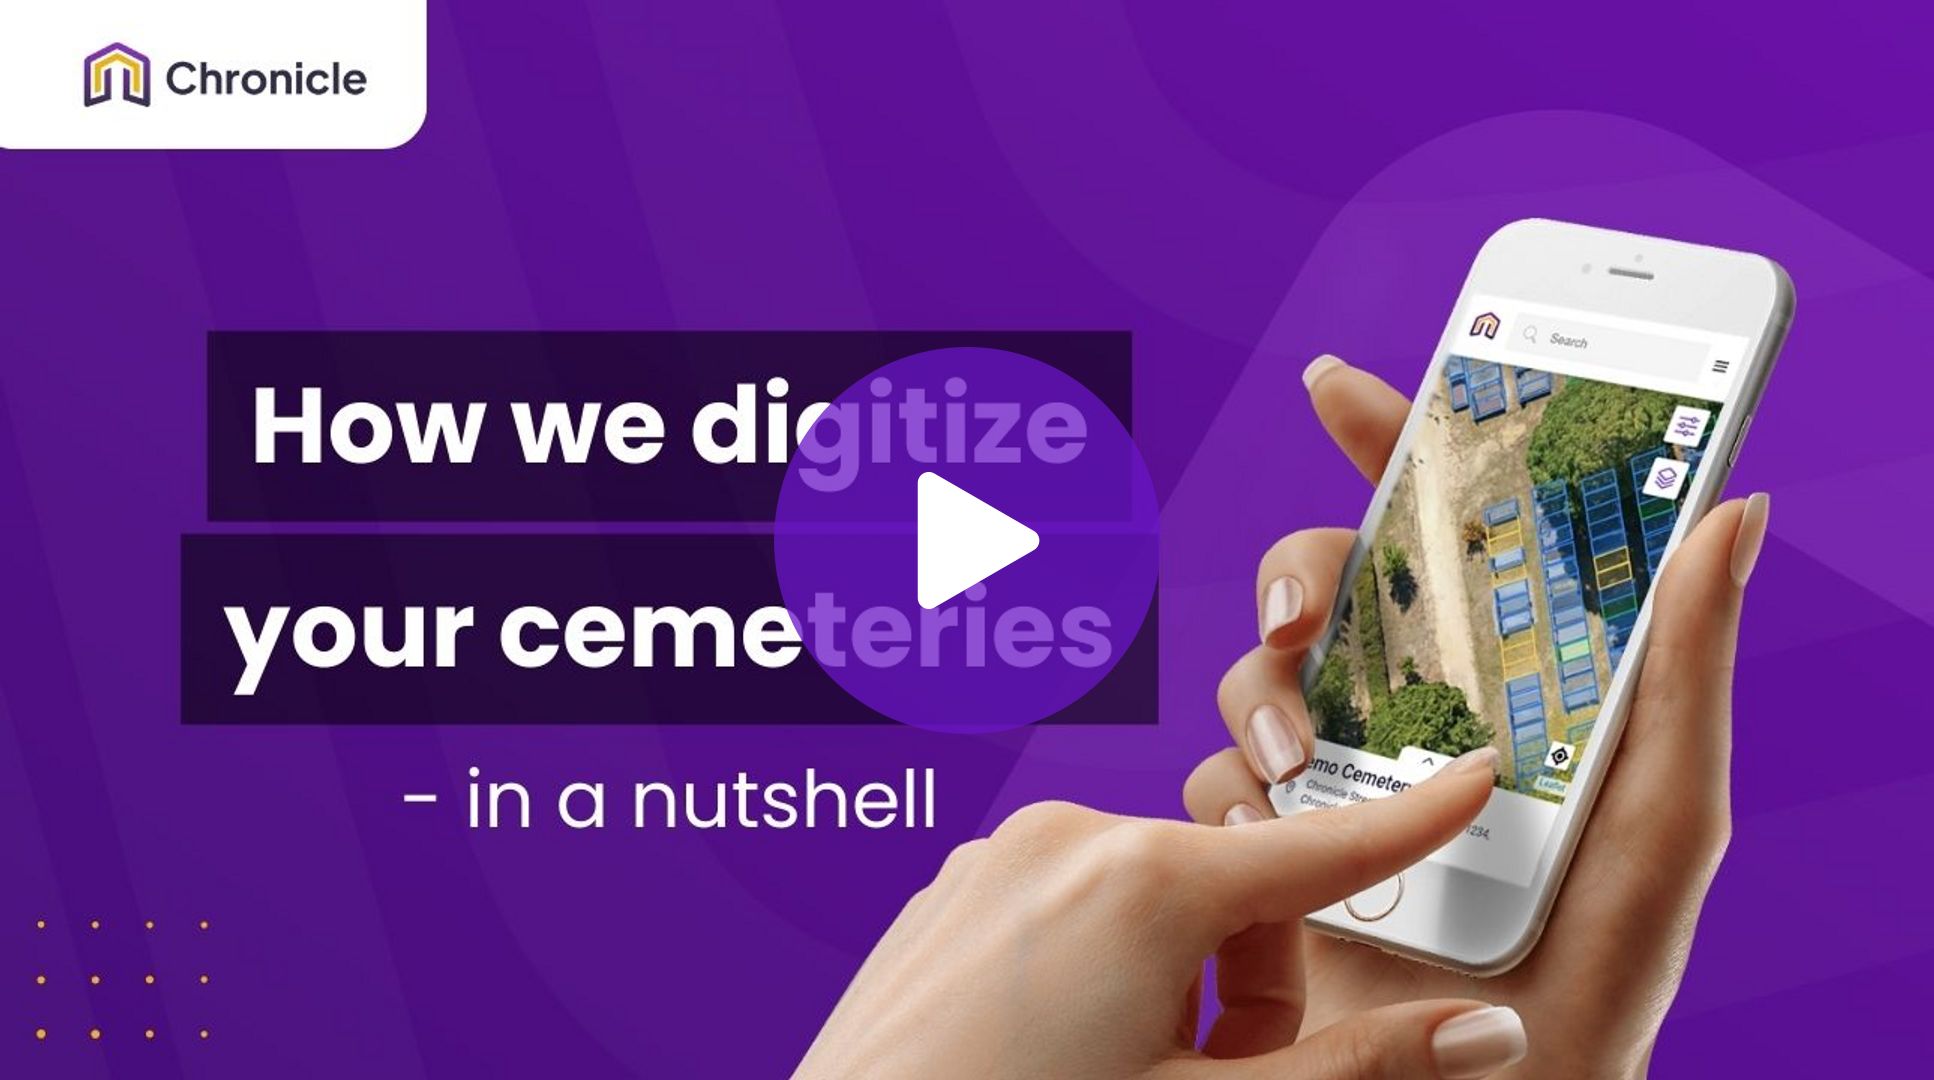 How we digitize your cemeteries - In a nutshell